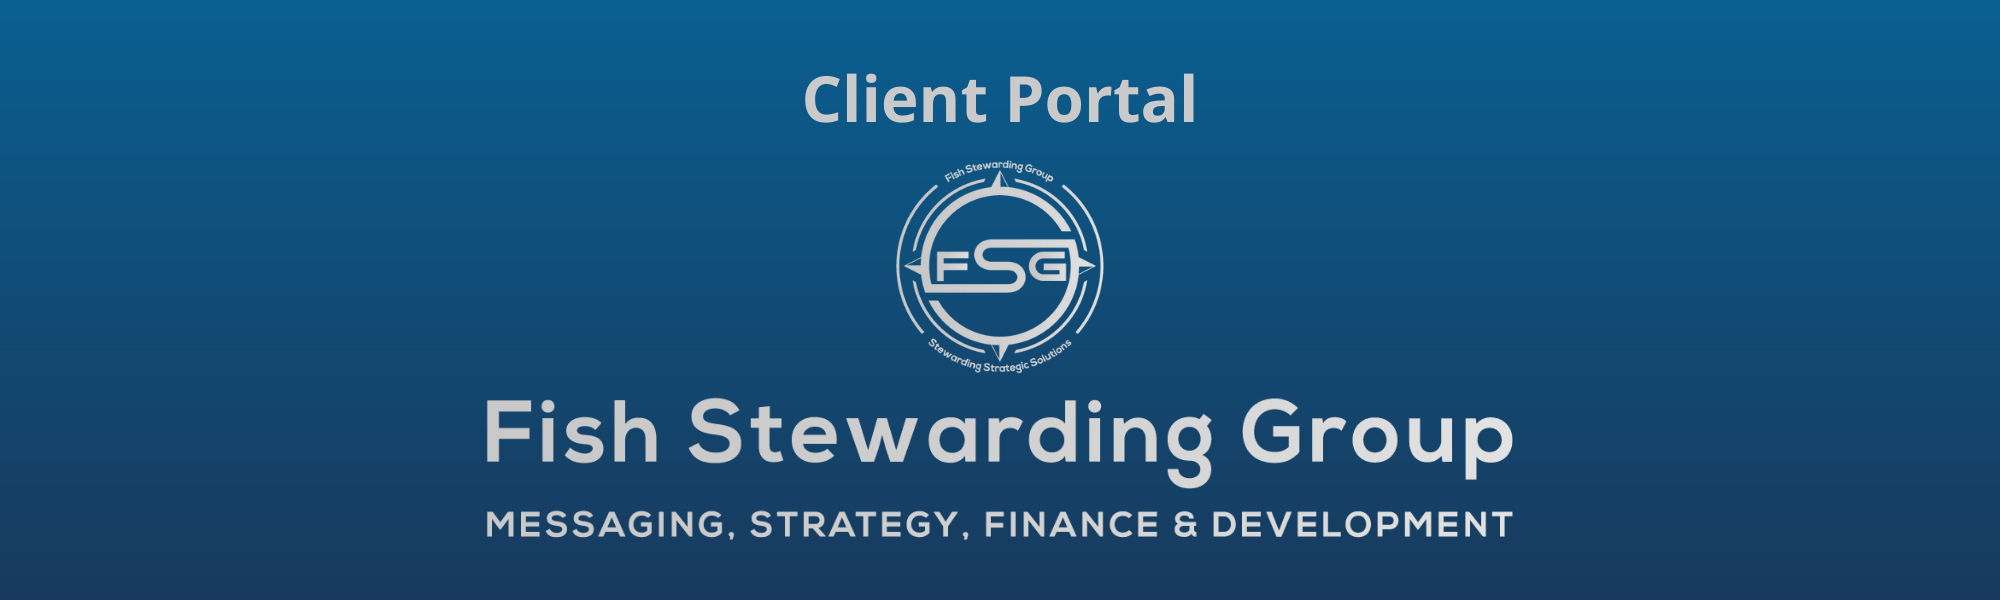 A thin rectangular Footer graphic for the Client Portal page. The background is a blue gradient color that goes from a dark blue on the bottom to a lighter blue on top. The text in gray on top reads Client Portal and FAQs. The text in gray on the bottom center reads: Fish Stewarding Group and beneath that, the text reads Messaging, Strategy, Finance and Development. In the center above the text is the FSG logo in gray. The logo has the letters FSG in the middle with a circle with four pointed arrows facing north, south, east and west with the S connected to that circle. Four rounded lines make the next circle of the circle and the last layer is a thin circle with the text on the Bottom that reads Stewarding Strategist Solutions and on top, the text reads Fish Stewarding Group.